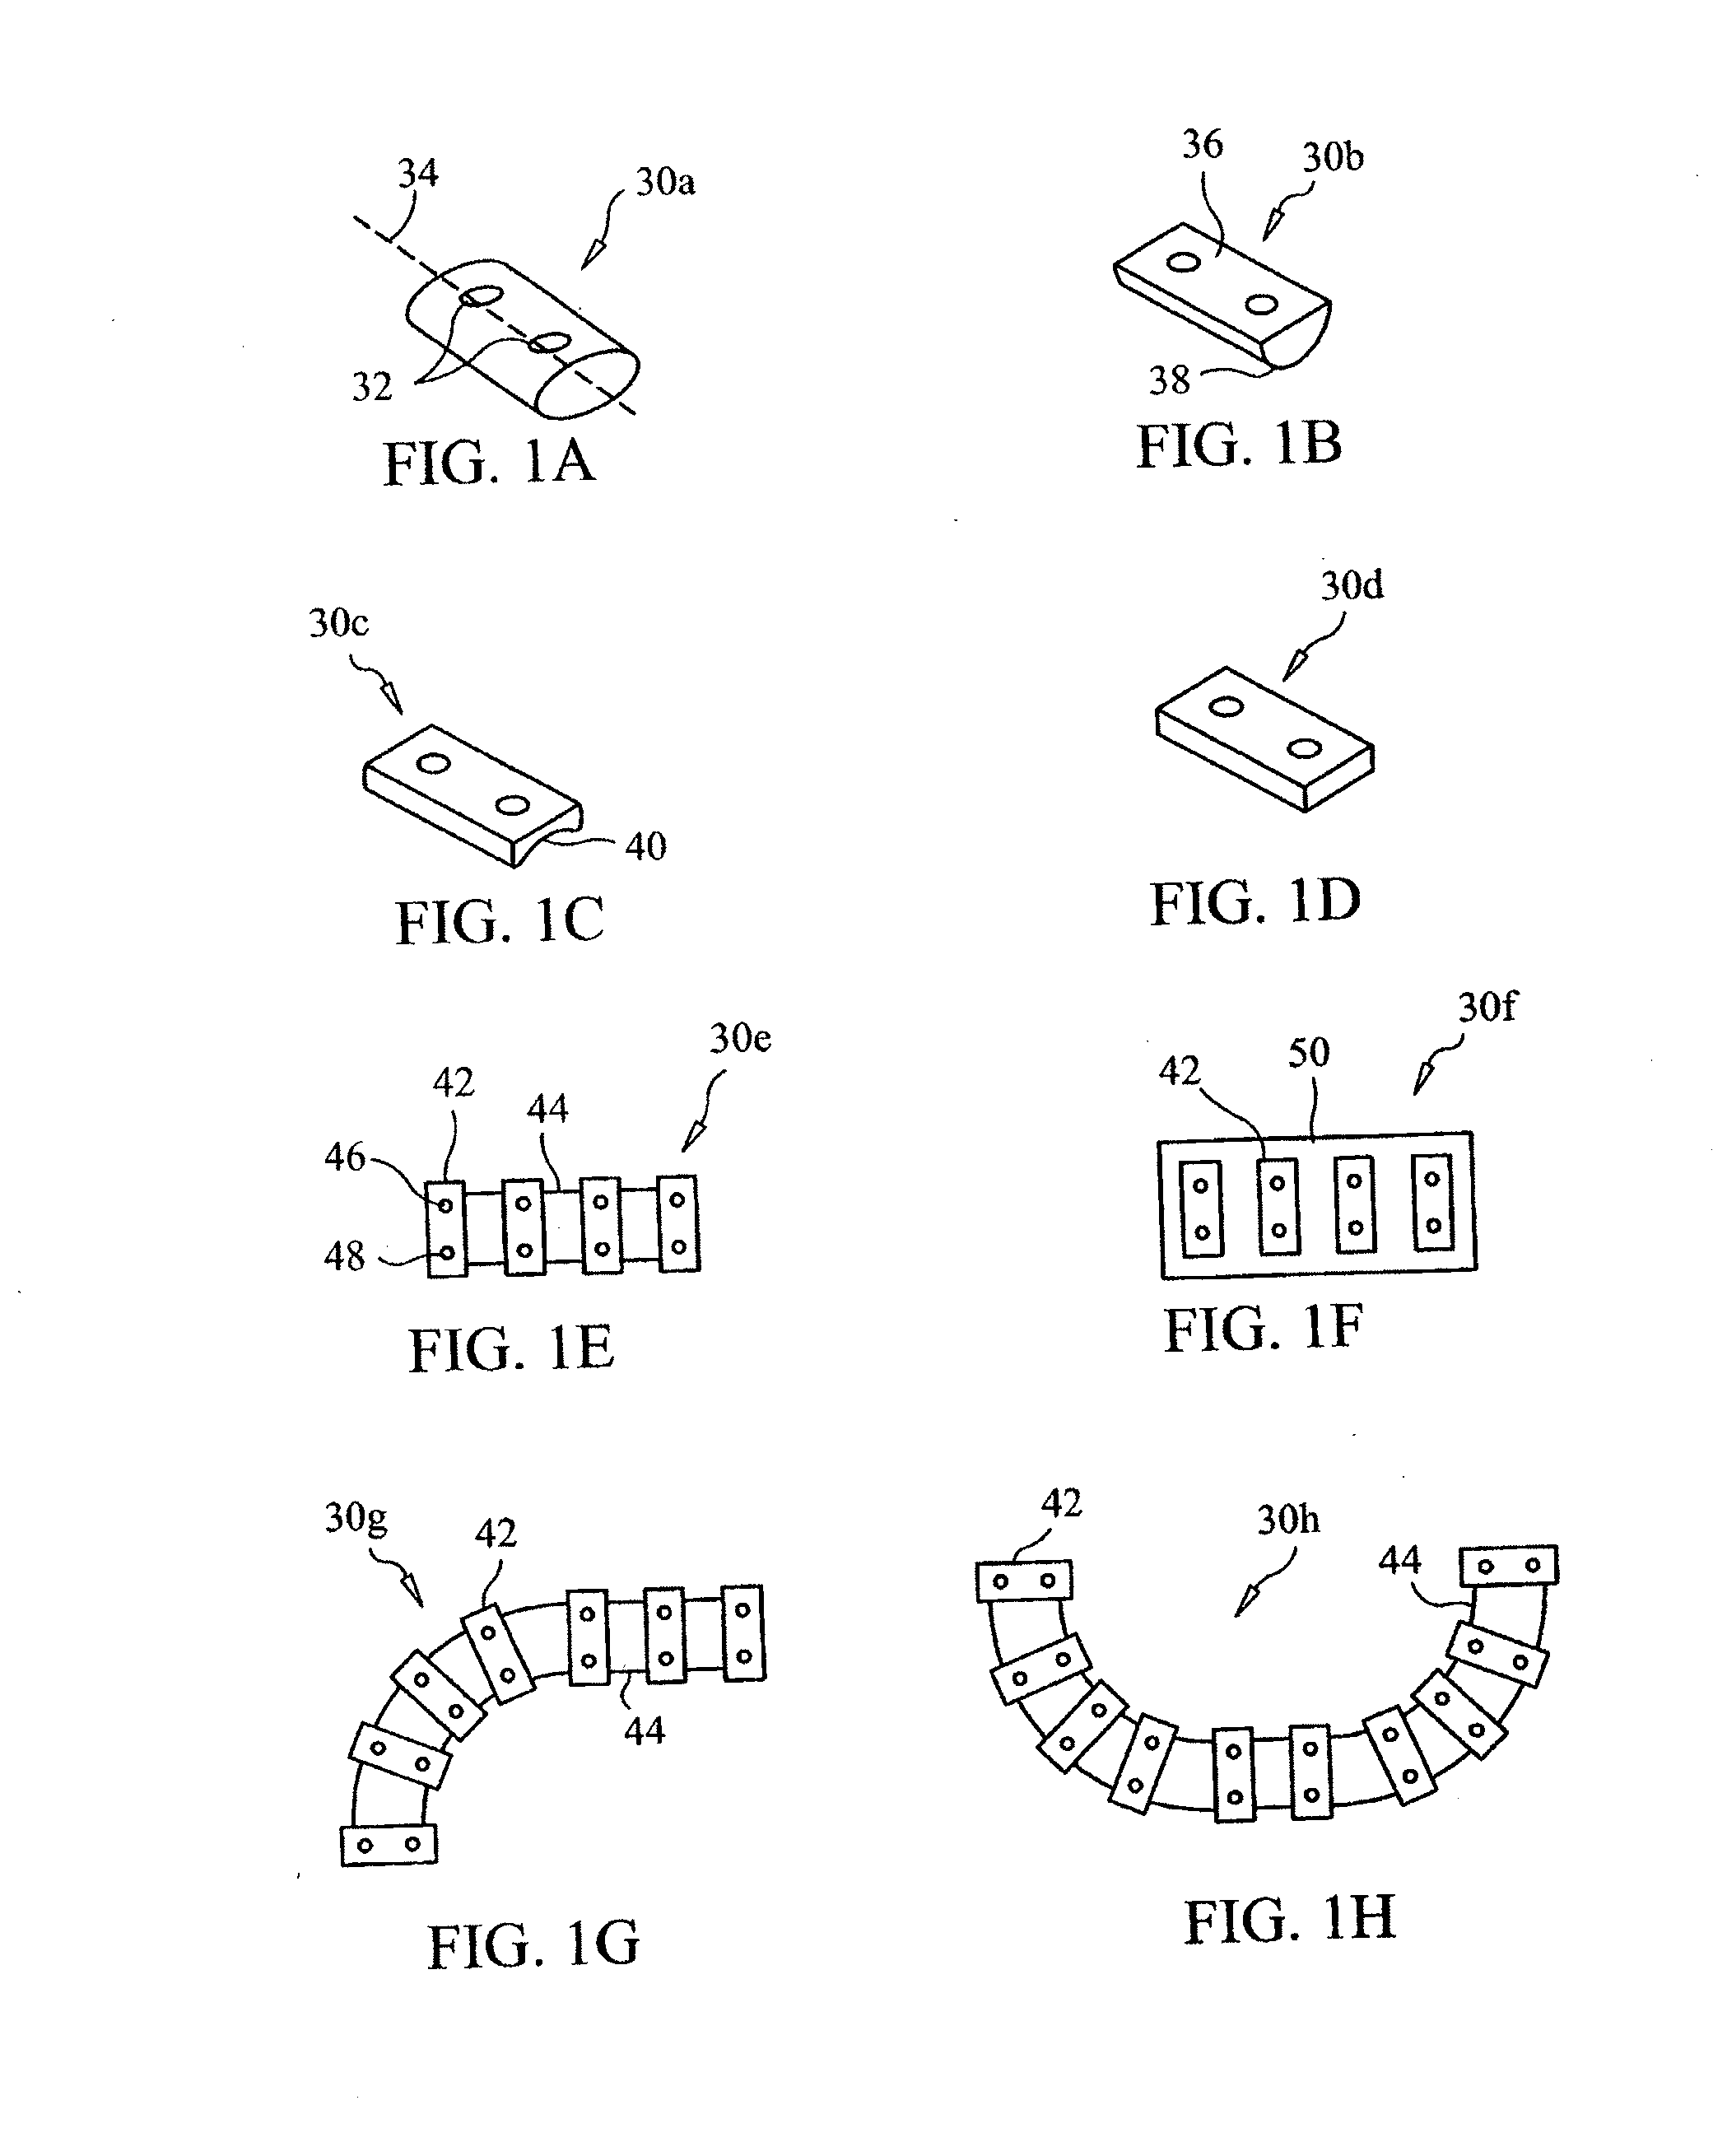 Devices and methods for stabilizing tissue and implants